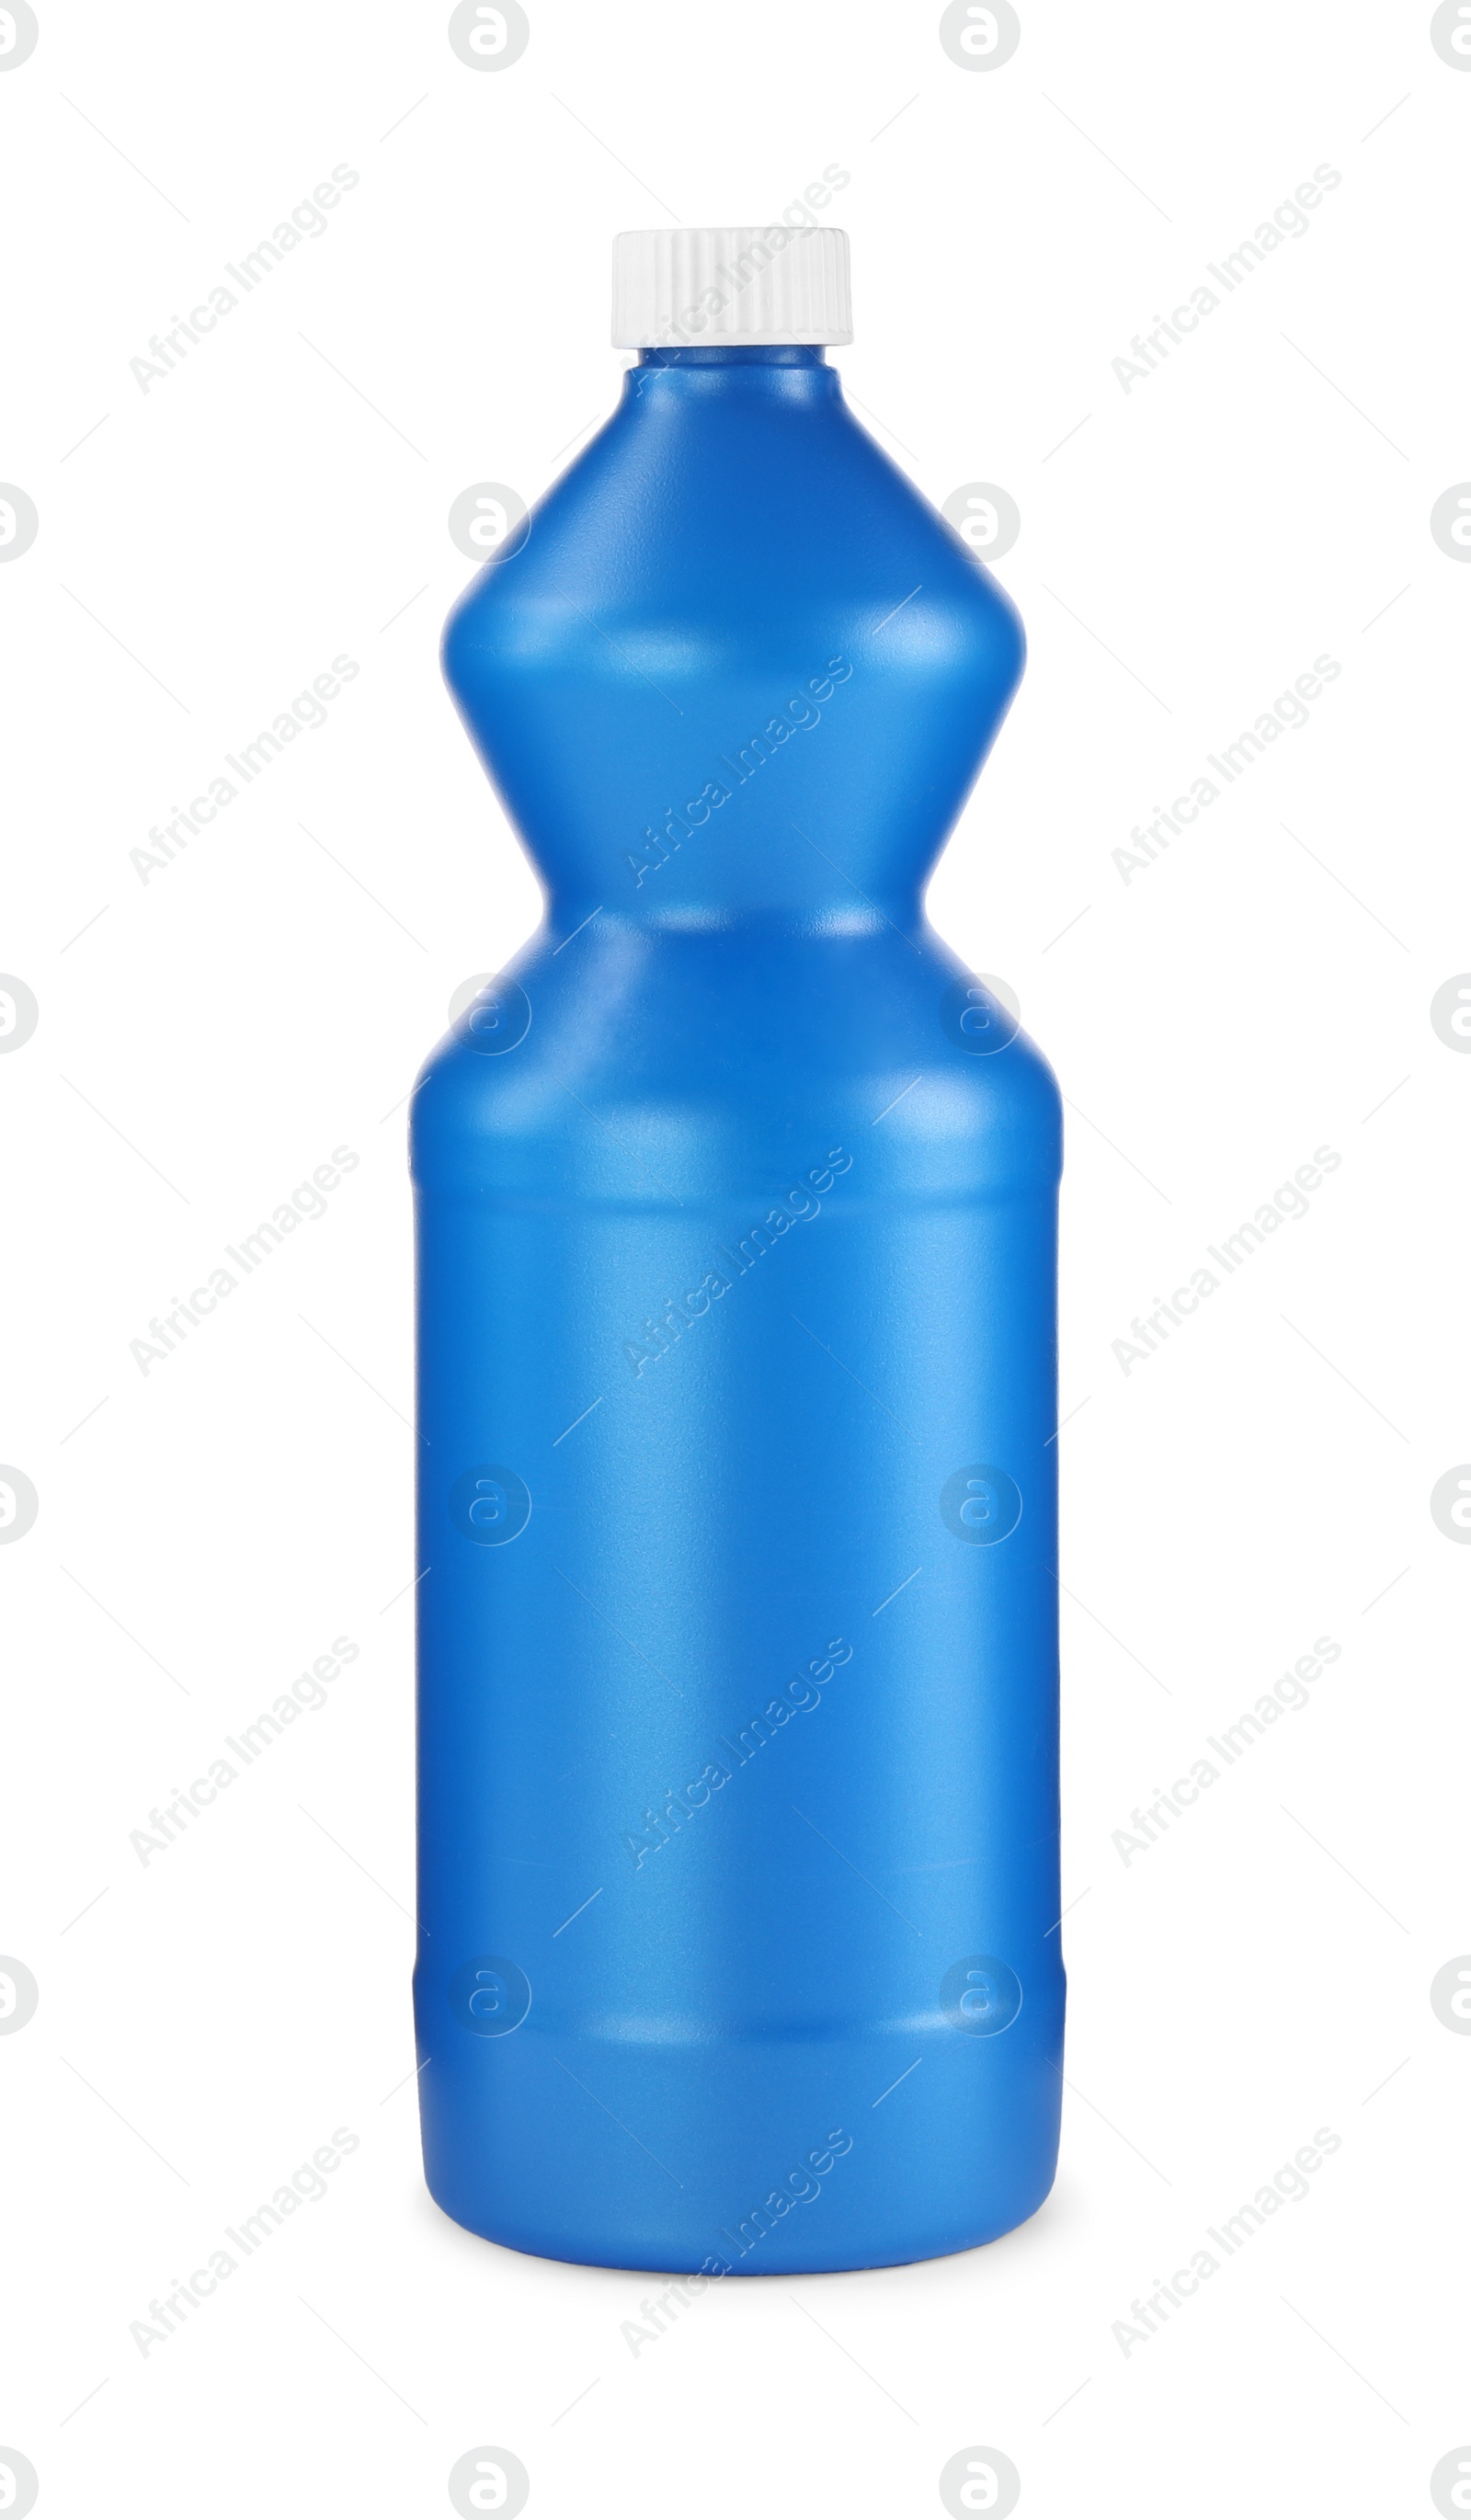 Photo of Blue bottle of cleaning product isolated on white